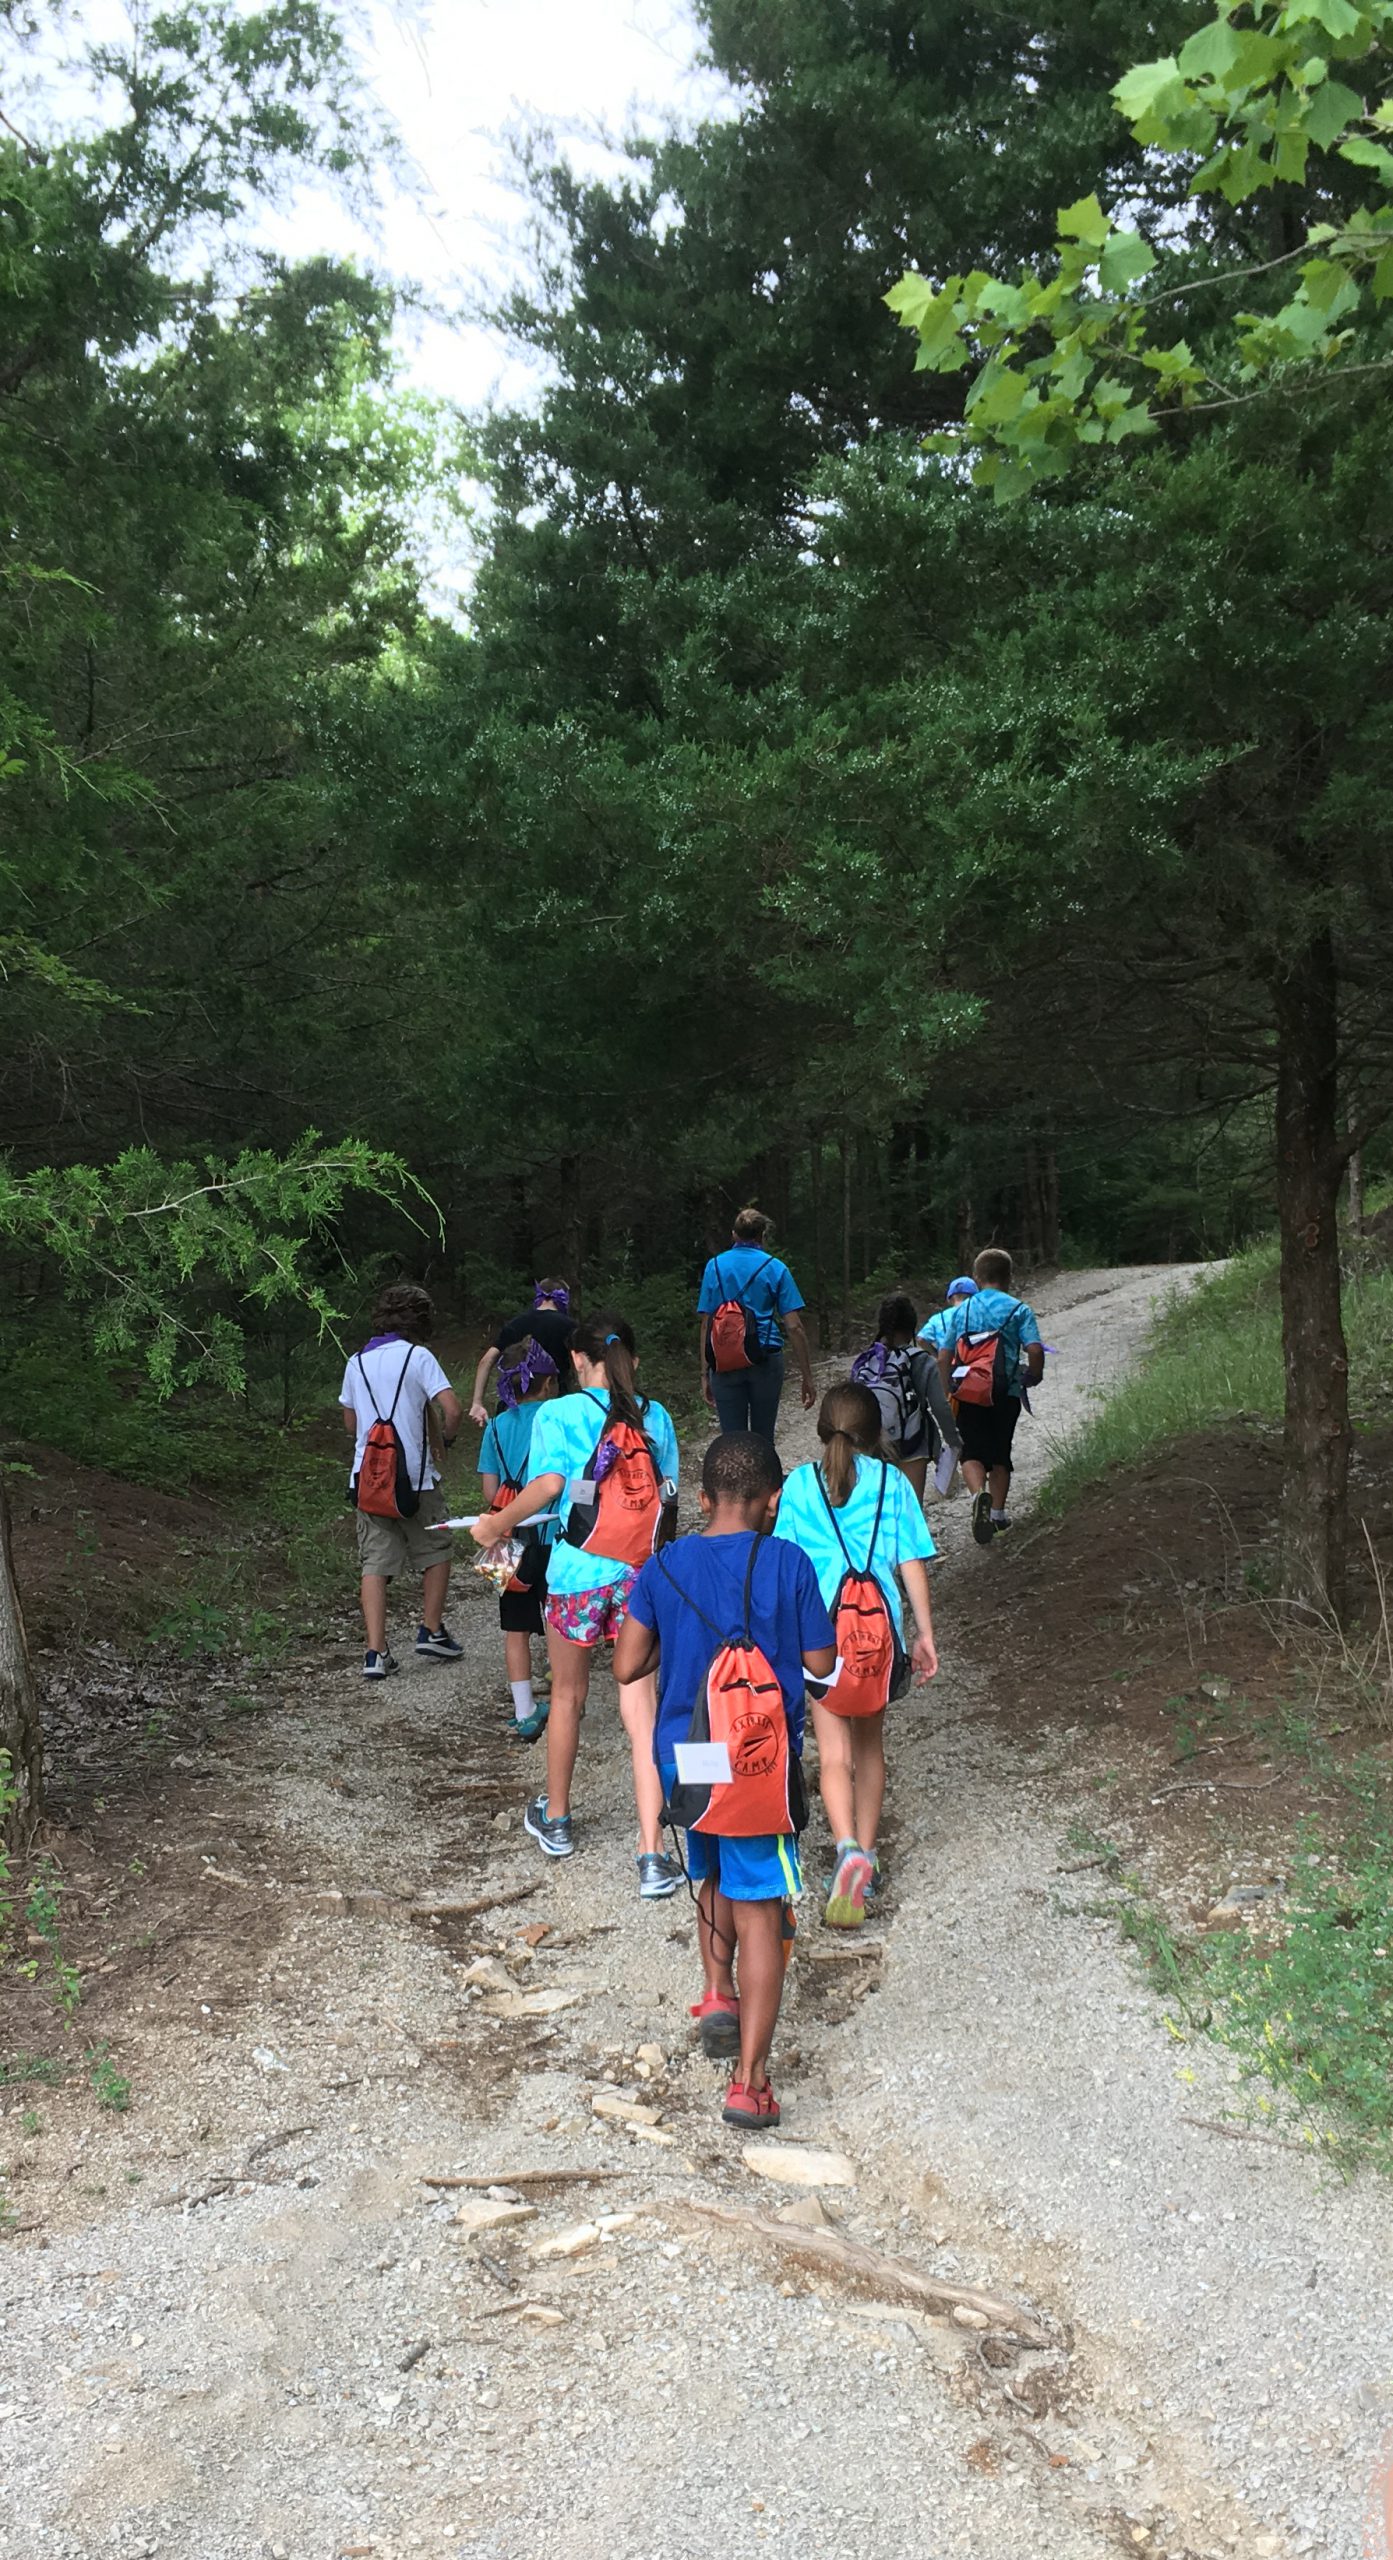 A diverse group of young children walking down a path through a forest